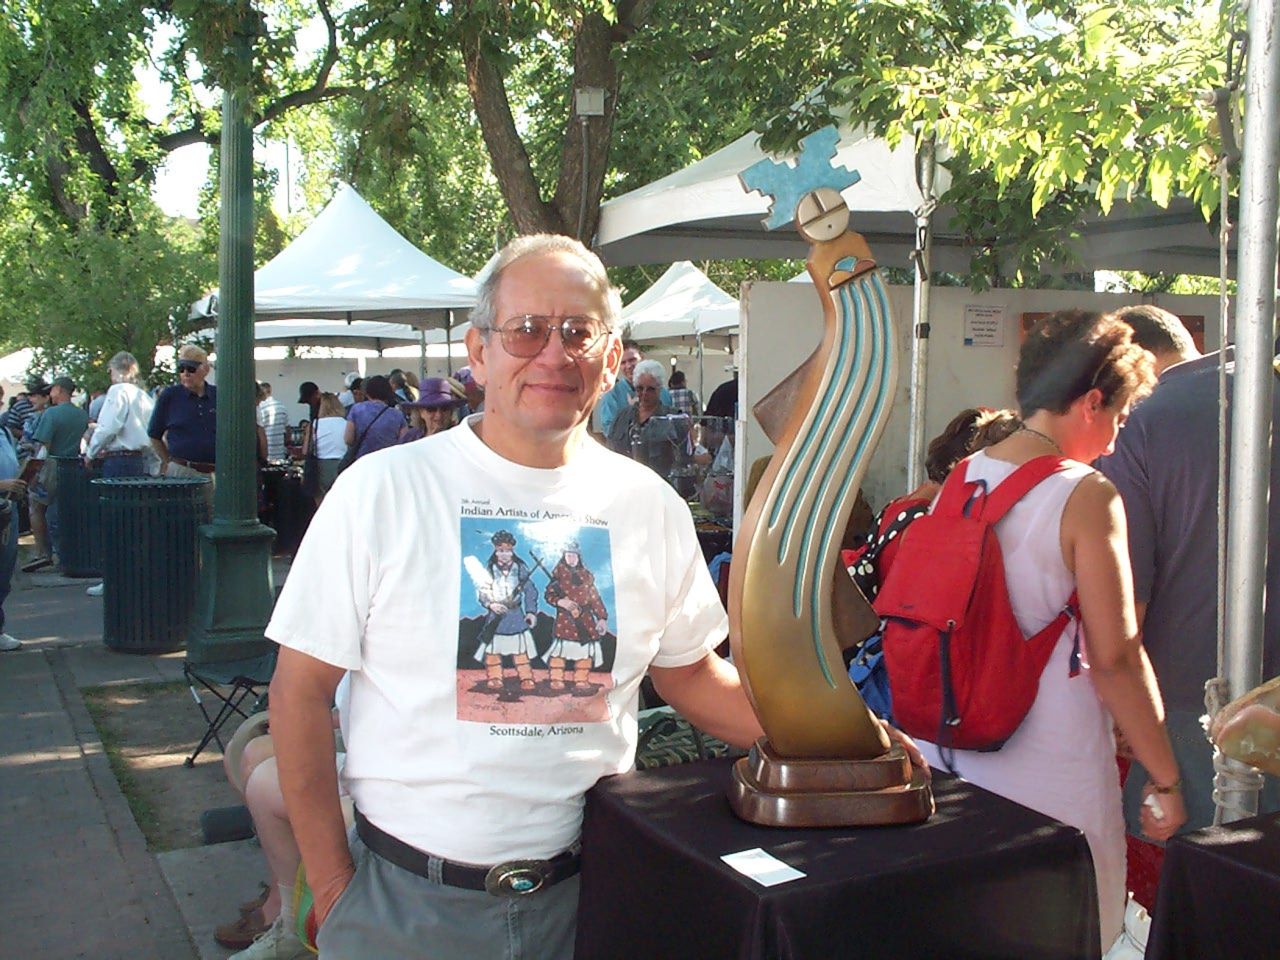 Artist Upton Greyshoes Ethelbah at his booth during the Santa Fe Indian Market.